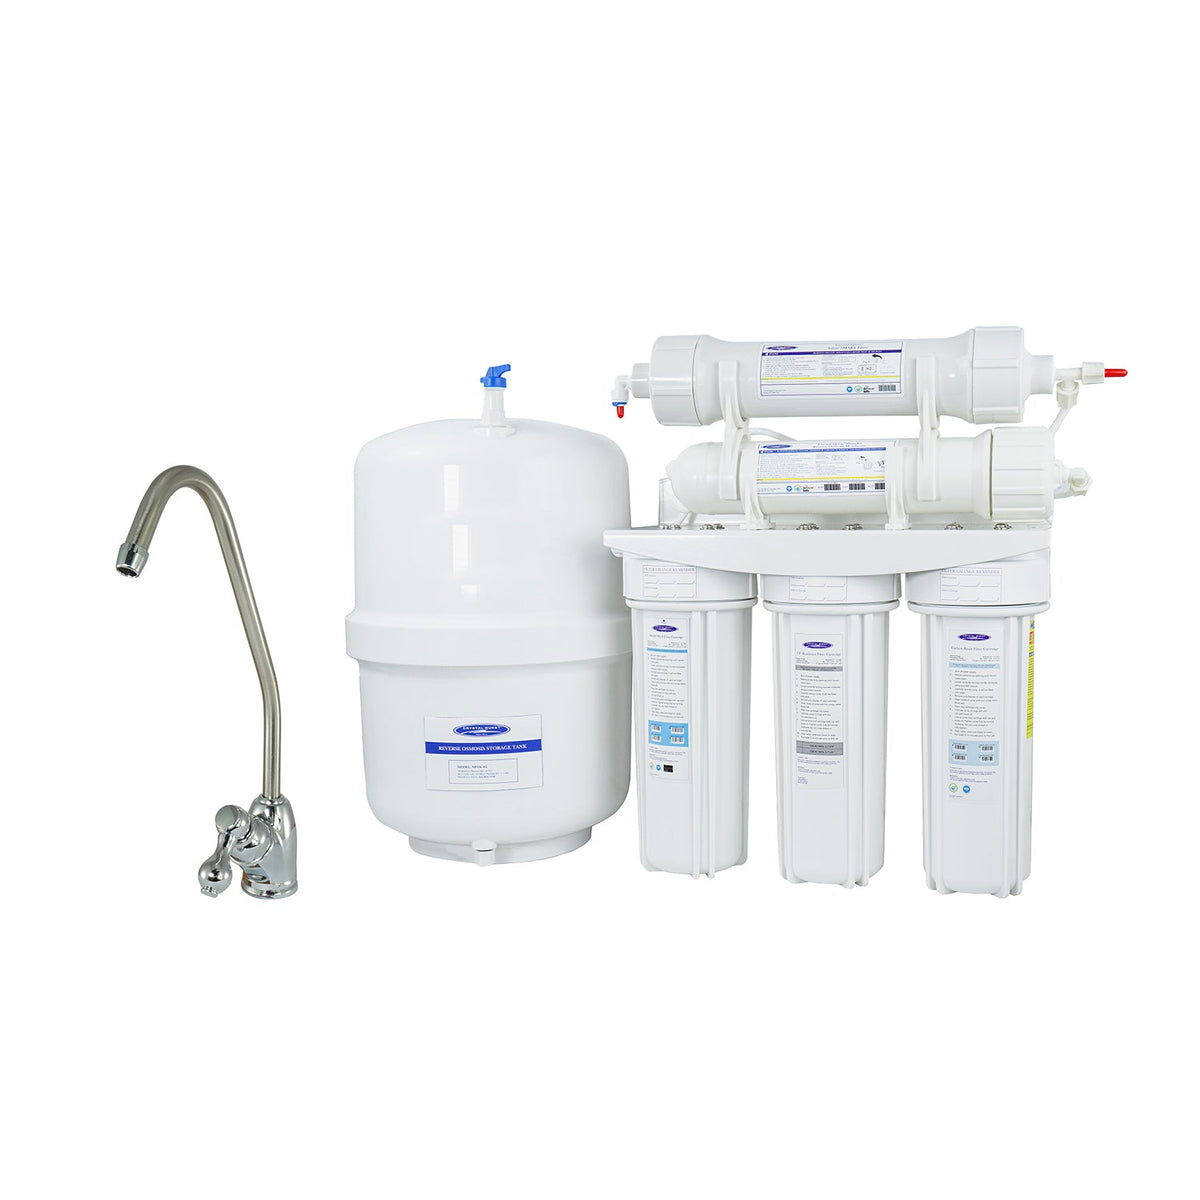 Thunder Ultrafiltration/Reverse Osmosis Under Sink Water Filter | 2000M | 16 Stages of Filtration - Reverse Osmosis System - Crystal Quest